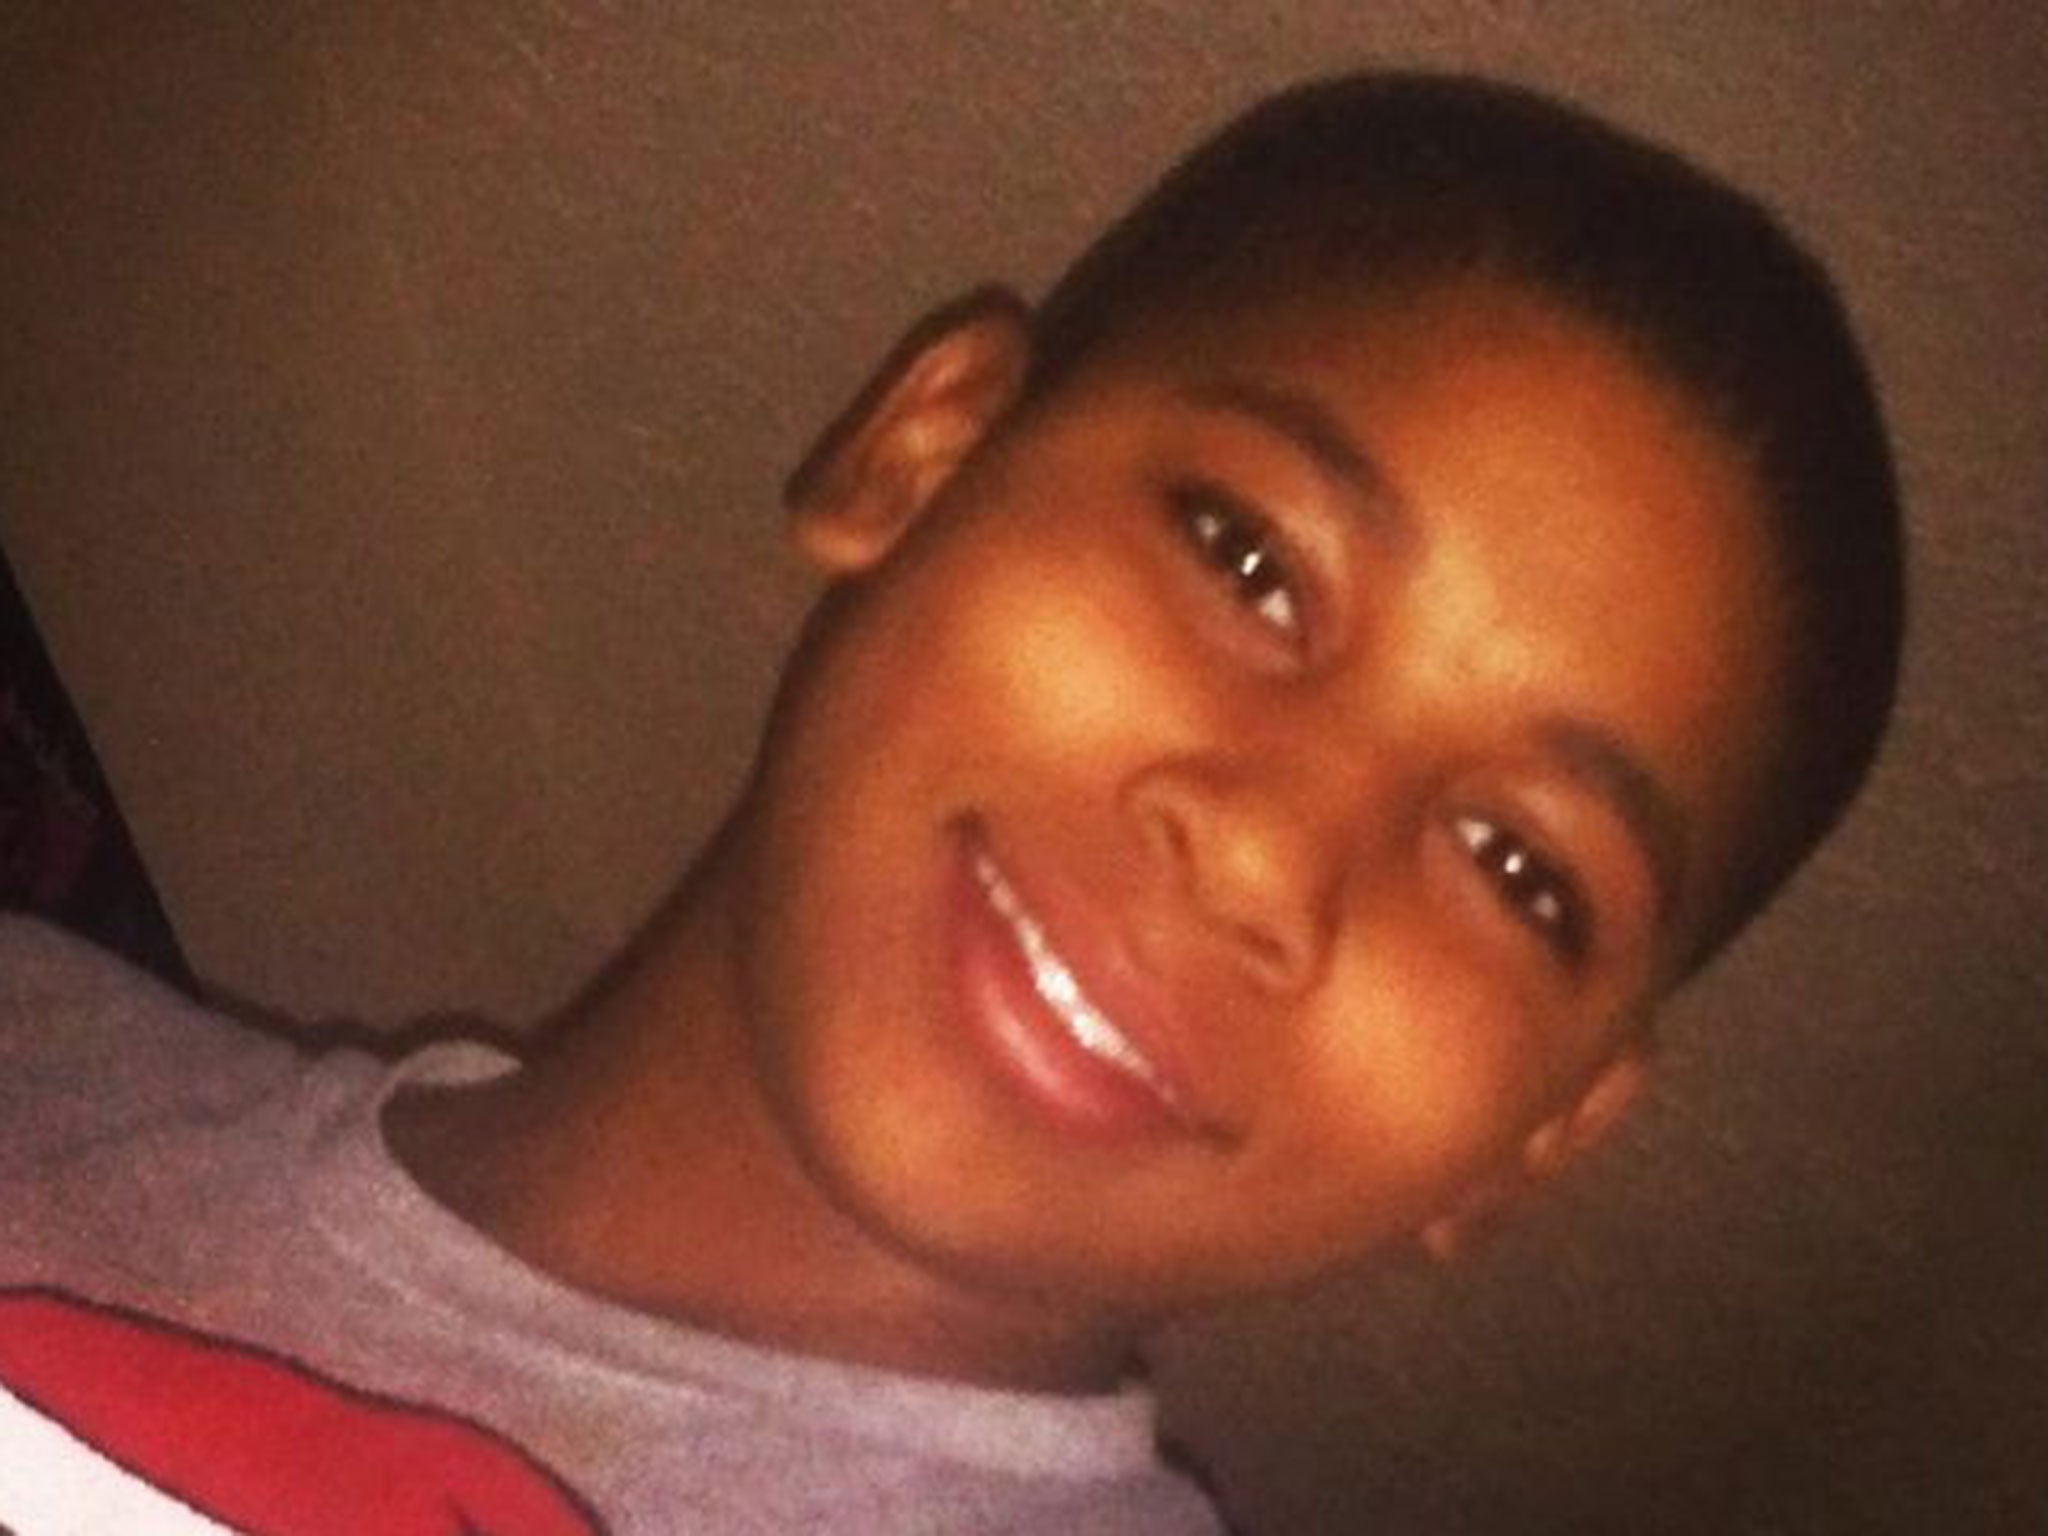 Tamir Rice, 12, was shot to death by police in Cleveland (AP)